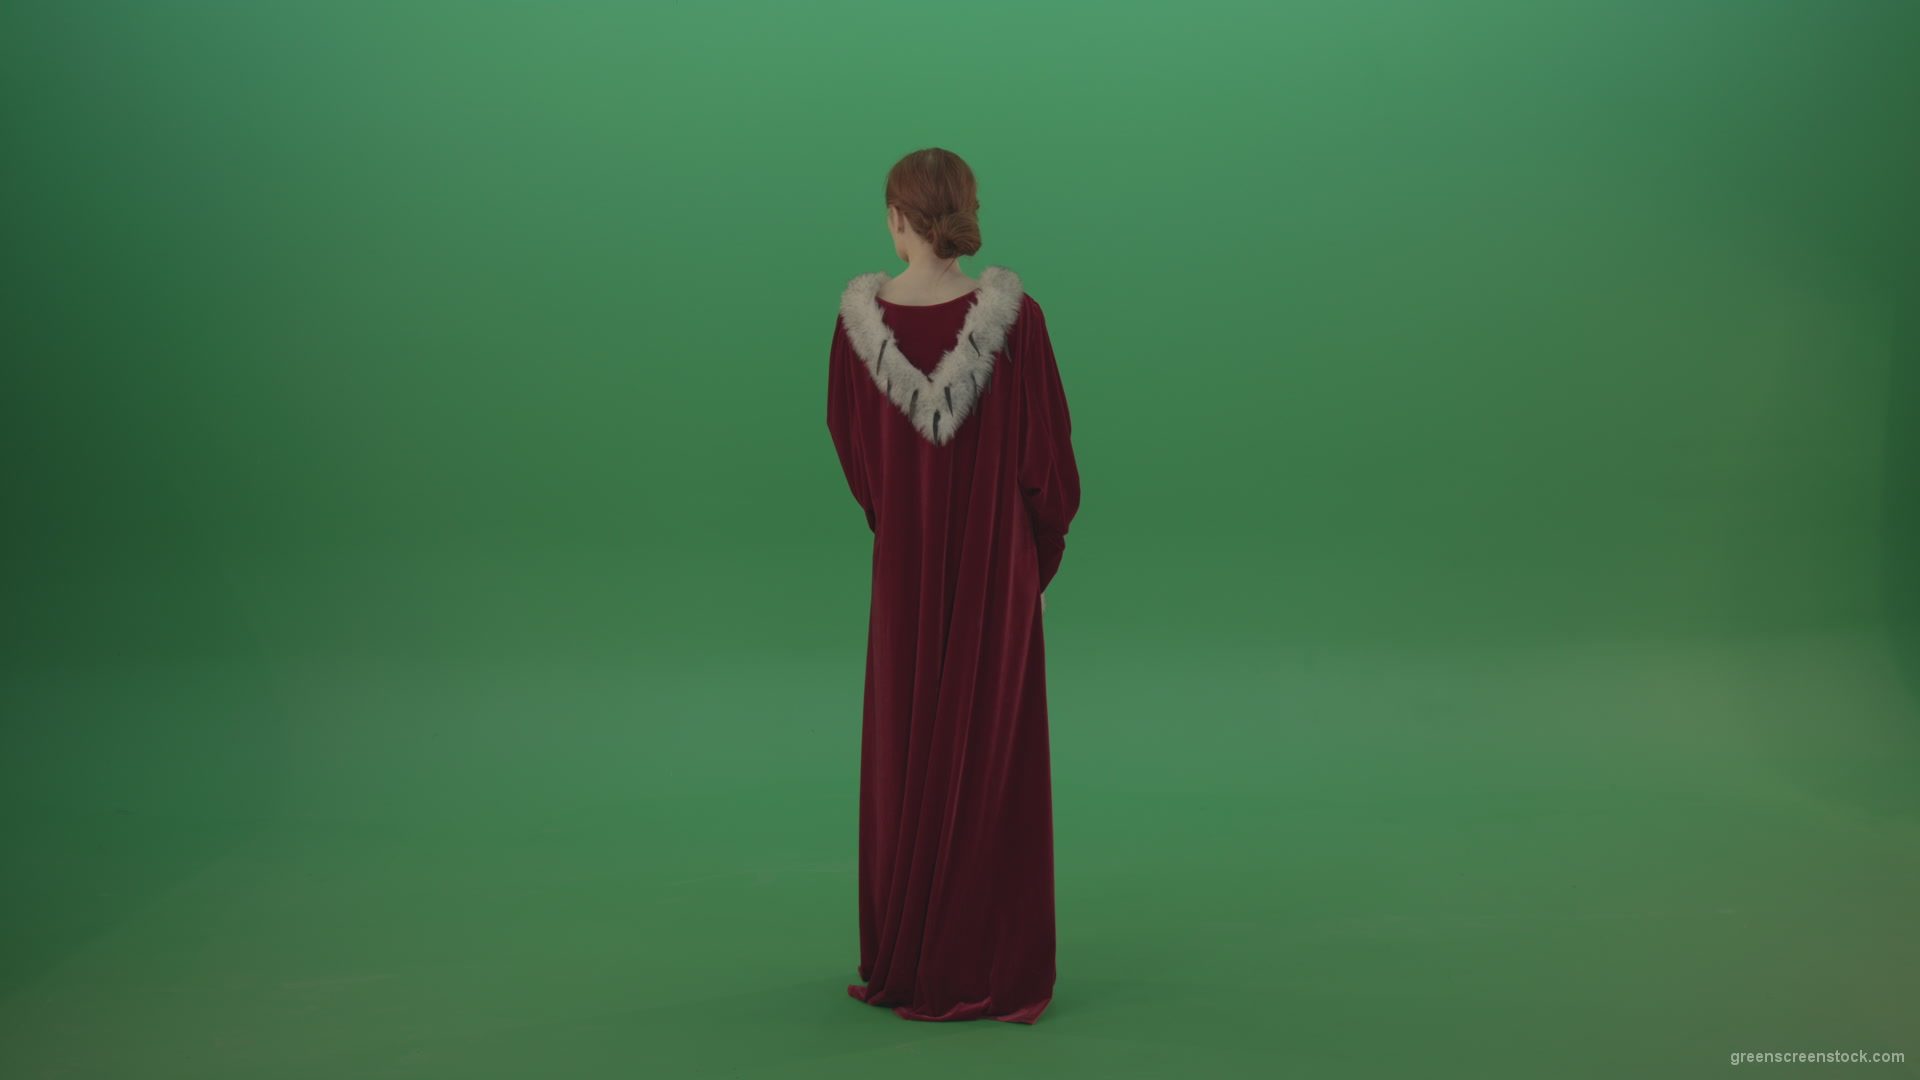 Elegant-woman-princess-with-light-movements-shows-her-beauty-dressed-in-red-cloak-on-a-green-background_005 Green Screen Stock